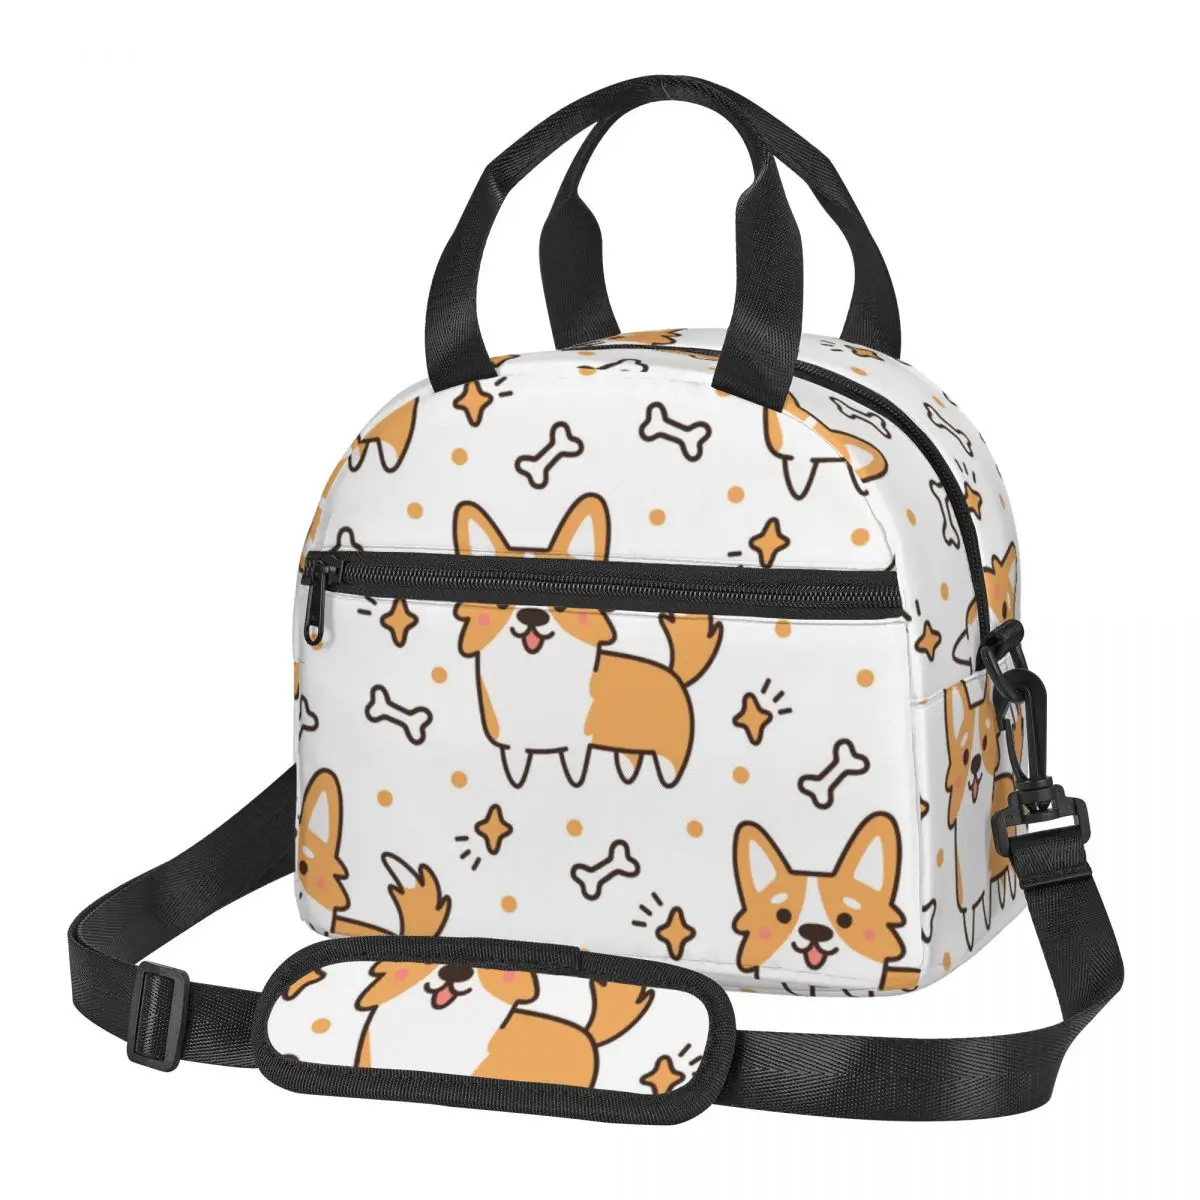 

Portable Insulated Thermal Bento Lunch Box Cute Dog Breed Welsh Corgi With Hearts Stars Bones Picnic Storage Bag Pouch Lunch Bag